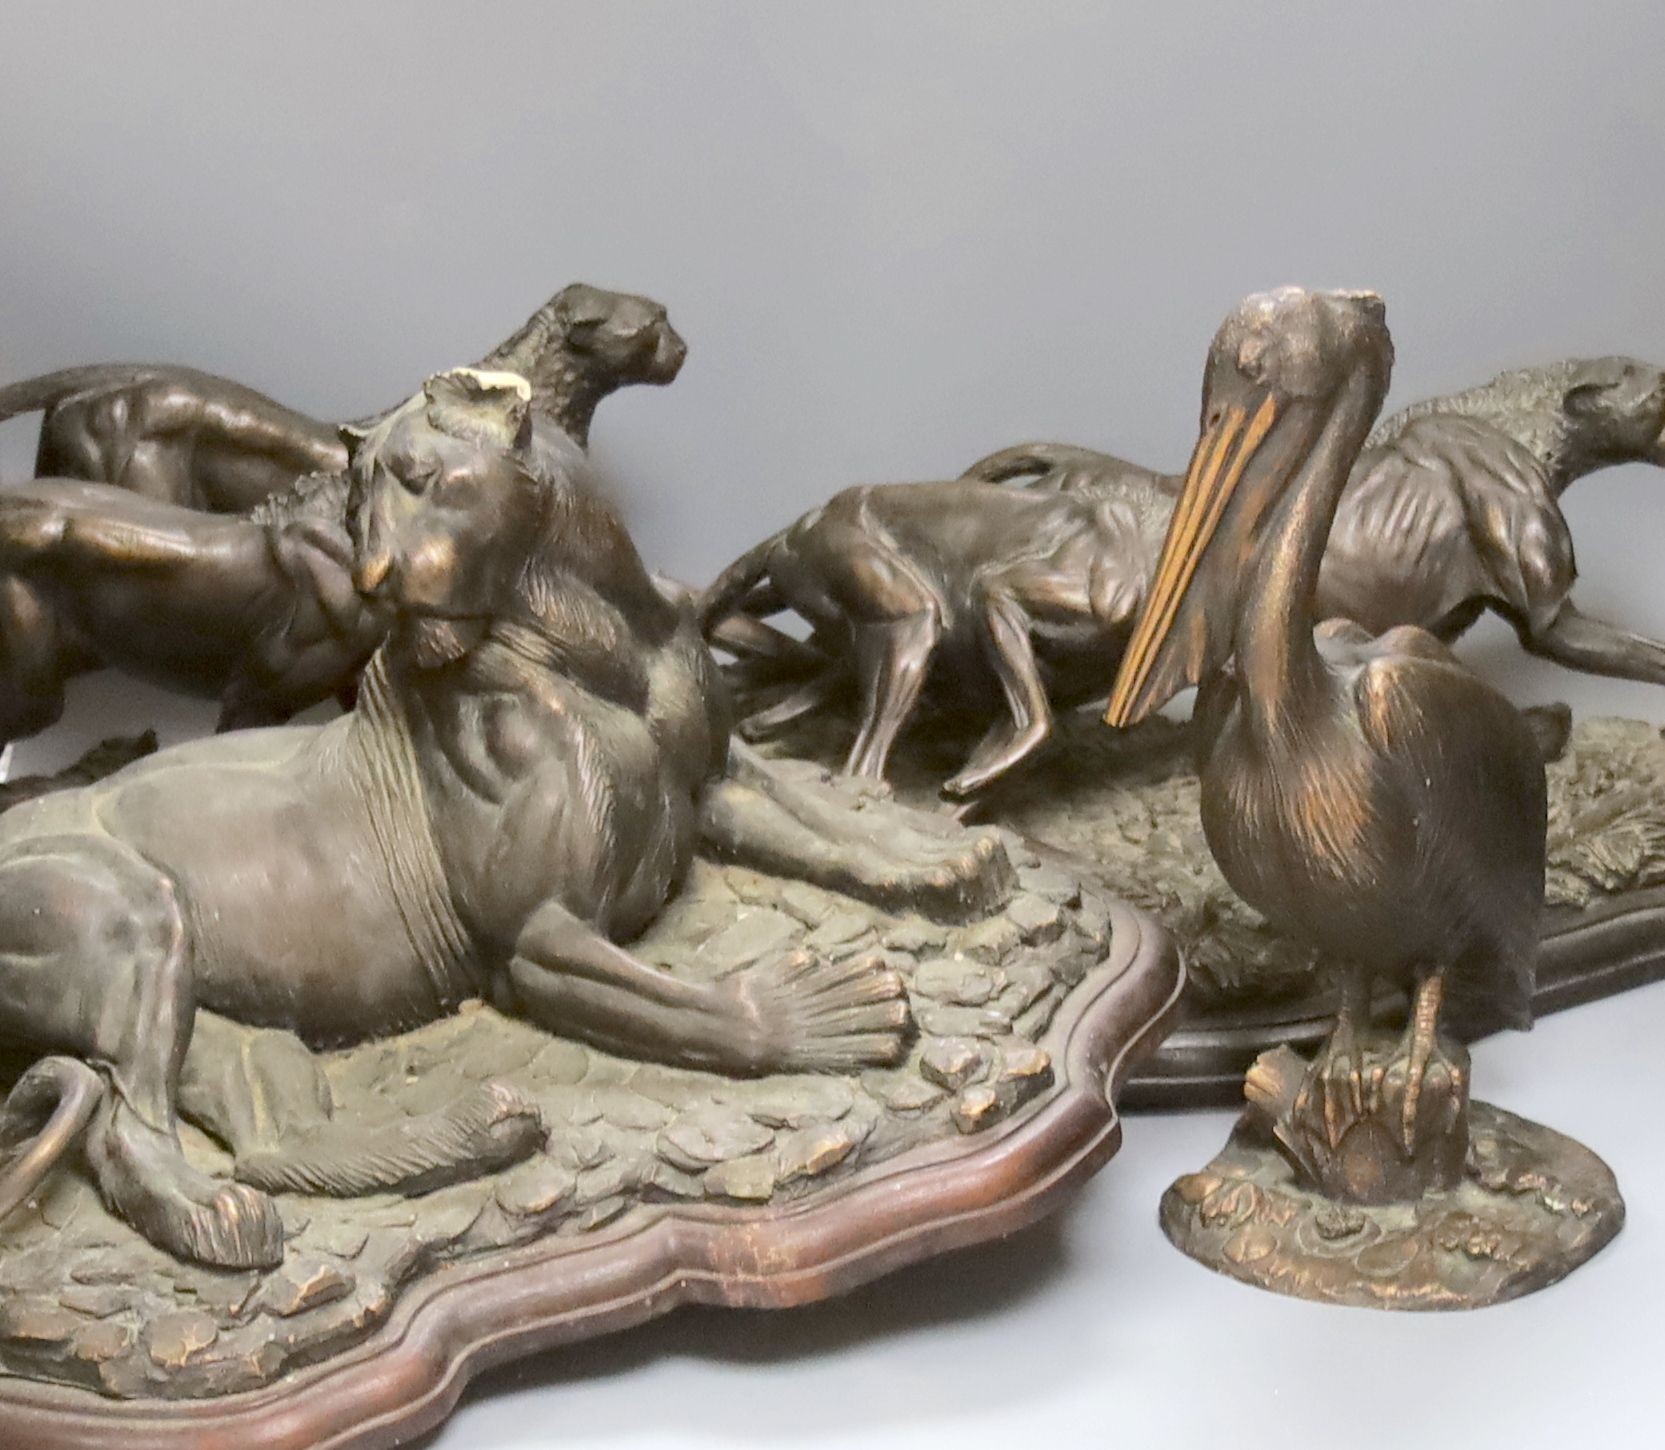 Tim Nicklin, three bronzed resin models of animals, Four cheetahs, 6/10, Pelican, 5/20 and Lioness, 2/10, largest 73cm, all with some degree of damage